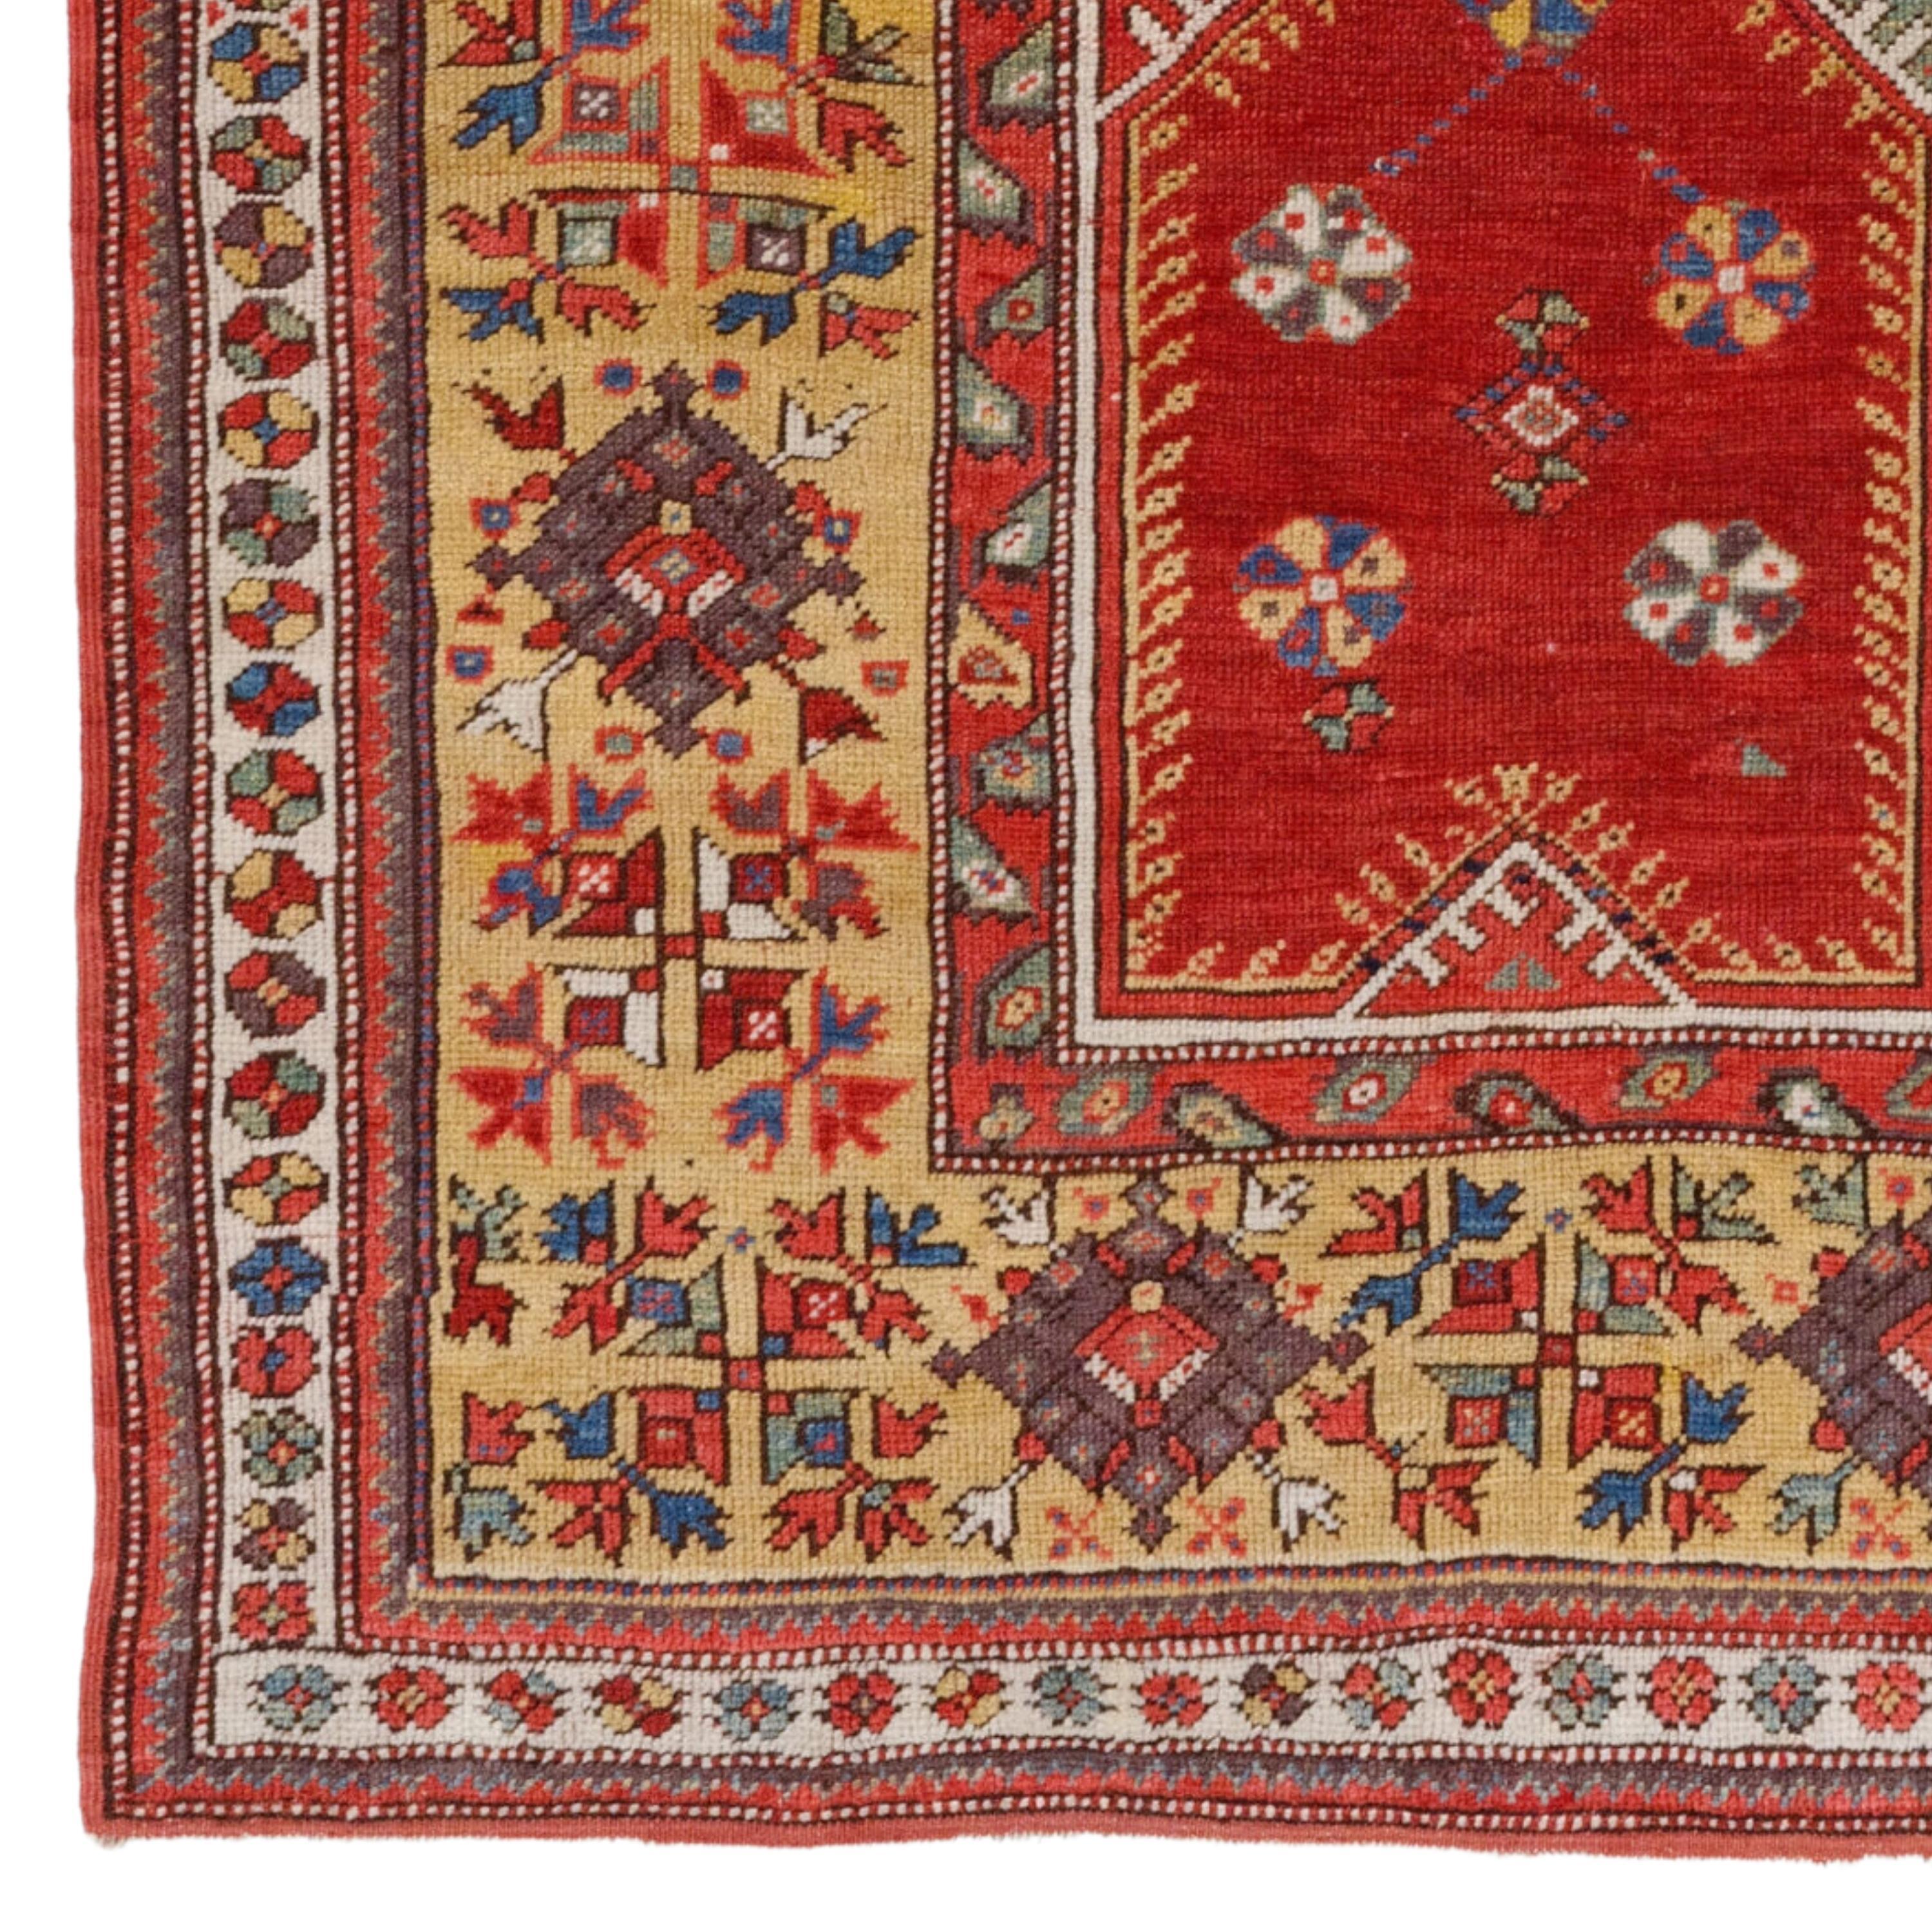 Antique Melas Prayer Rug - Middle Of The 19th Century Anatolian Milas Prayer Rug Size 125 x 170 cm (4,10 x 5,57 ft)

Melas carpet, floor covering handwoven in the neighbourhood of Milâs (Melas) on the Aegean coast of southwestern Turkey. Normally of